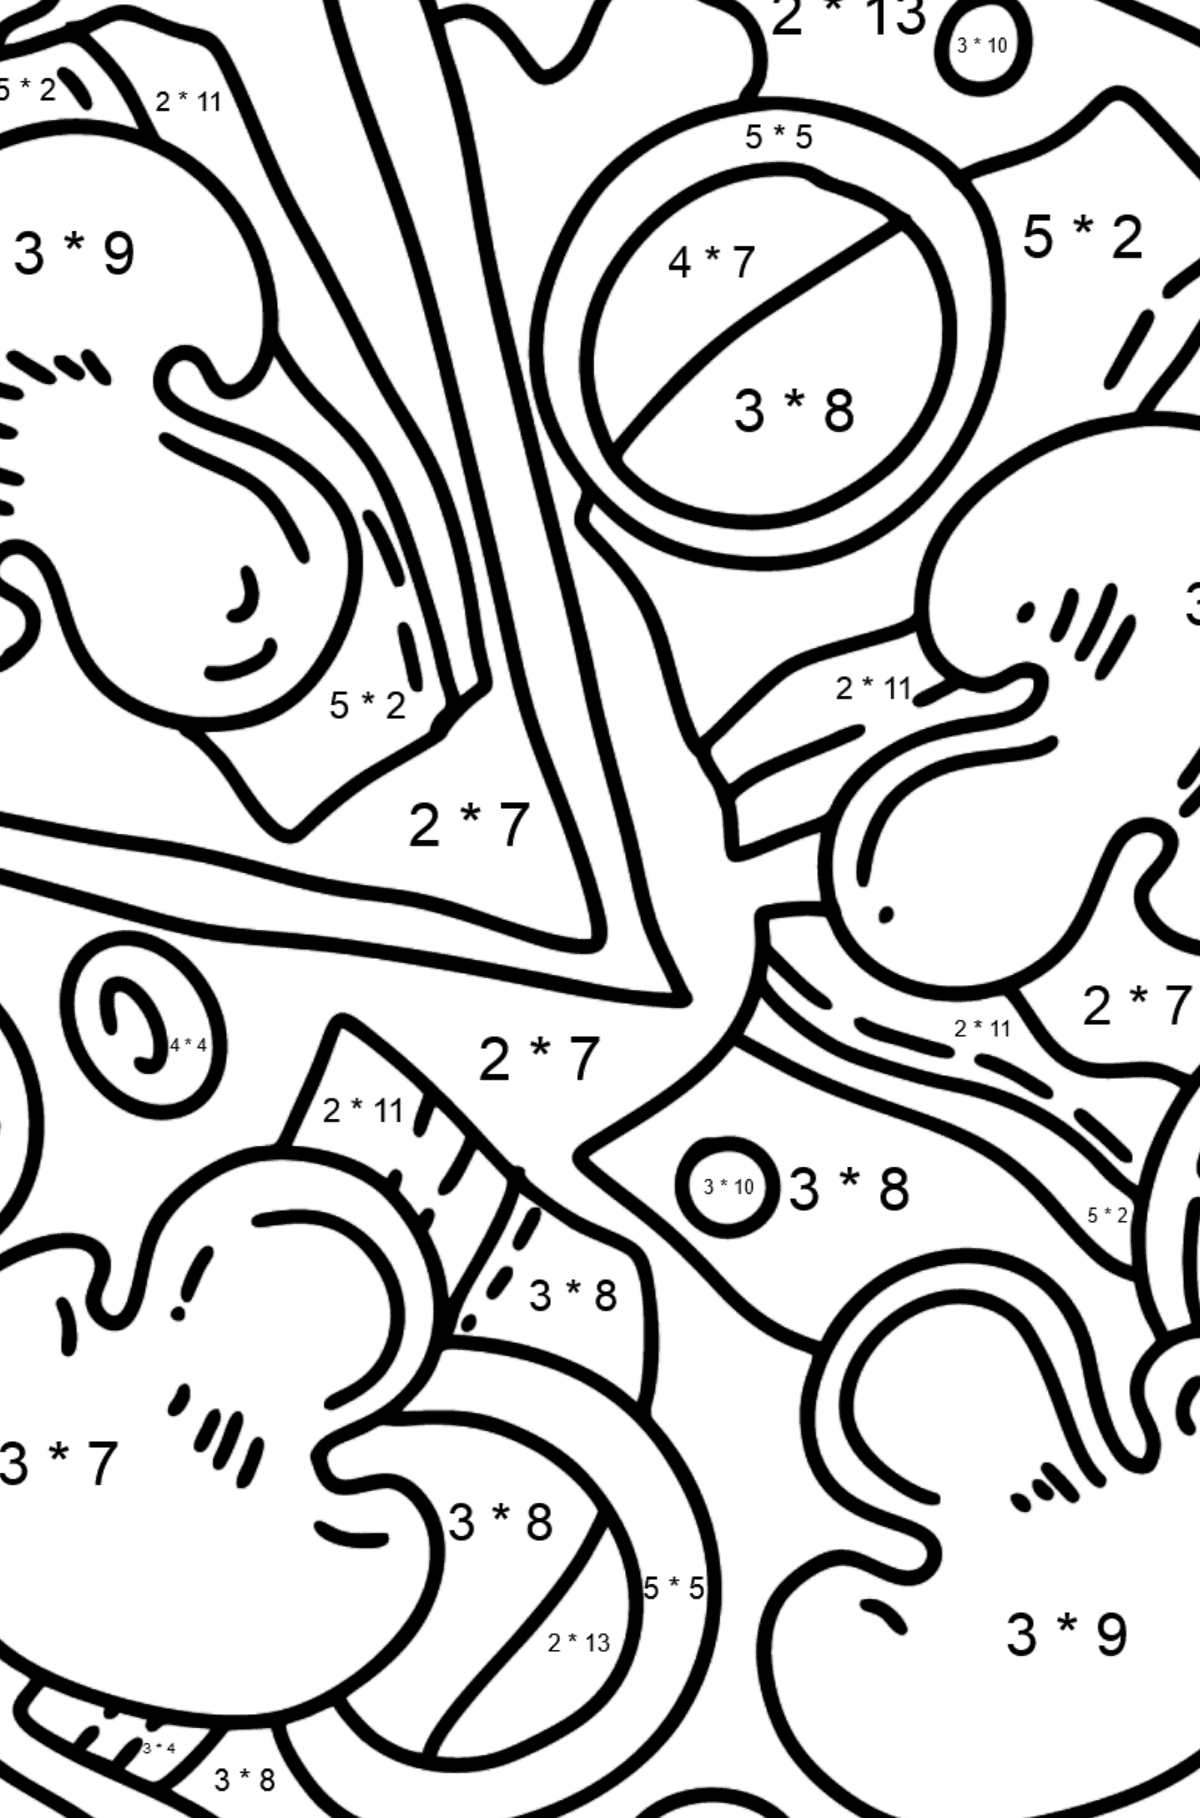 Pizza with Mushrooms coloring page - Math Coloring - Multiplication for Kids